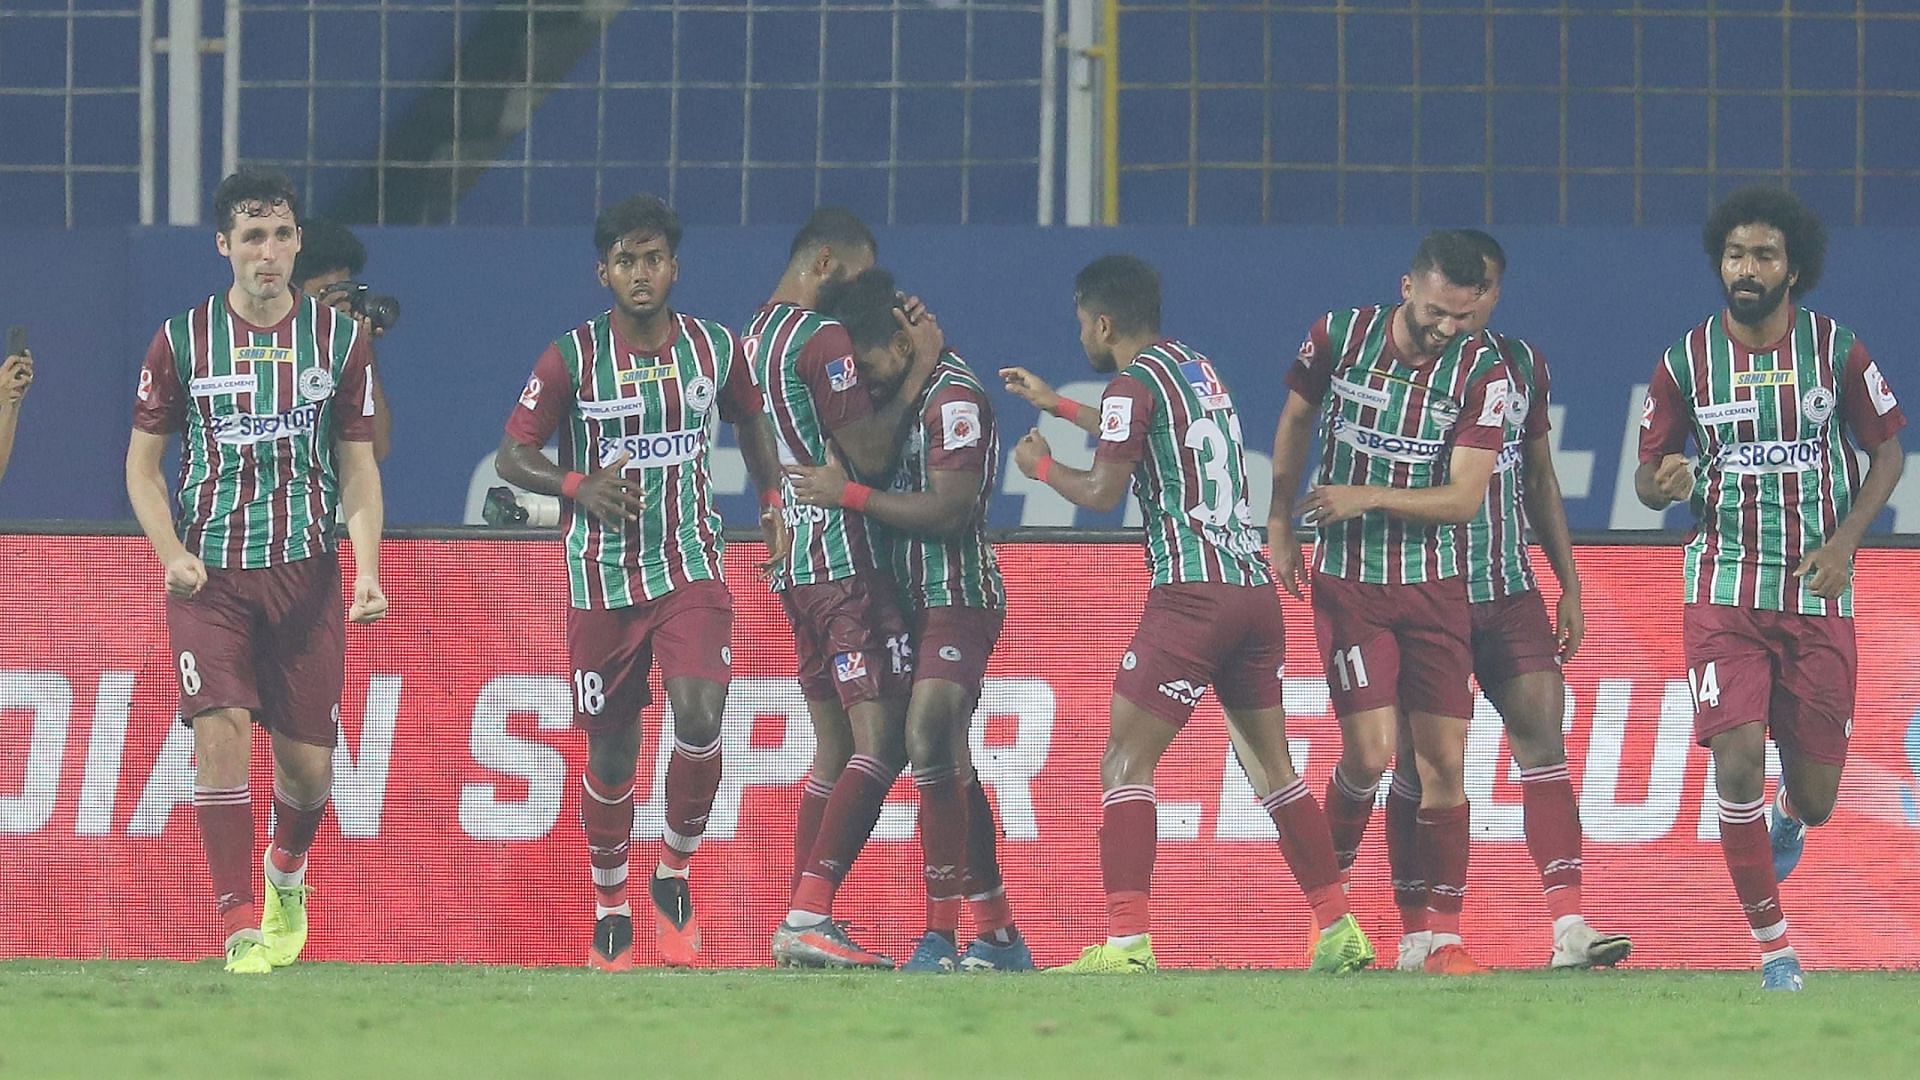 ATK Mohun Bagan players in action during an earlier ISL match. (Image courtesy: ISL Media)